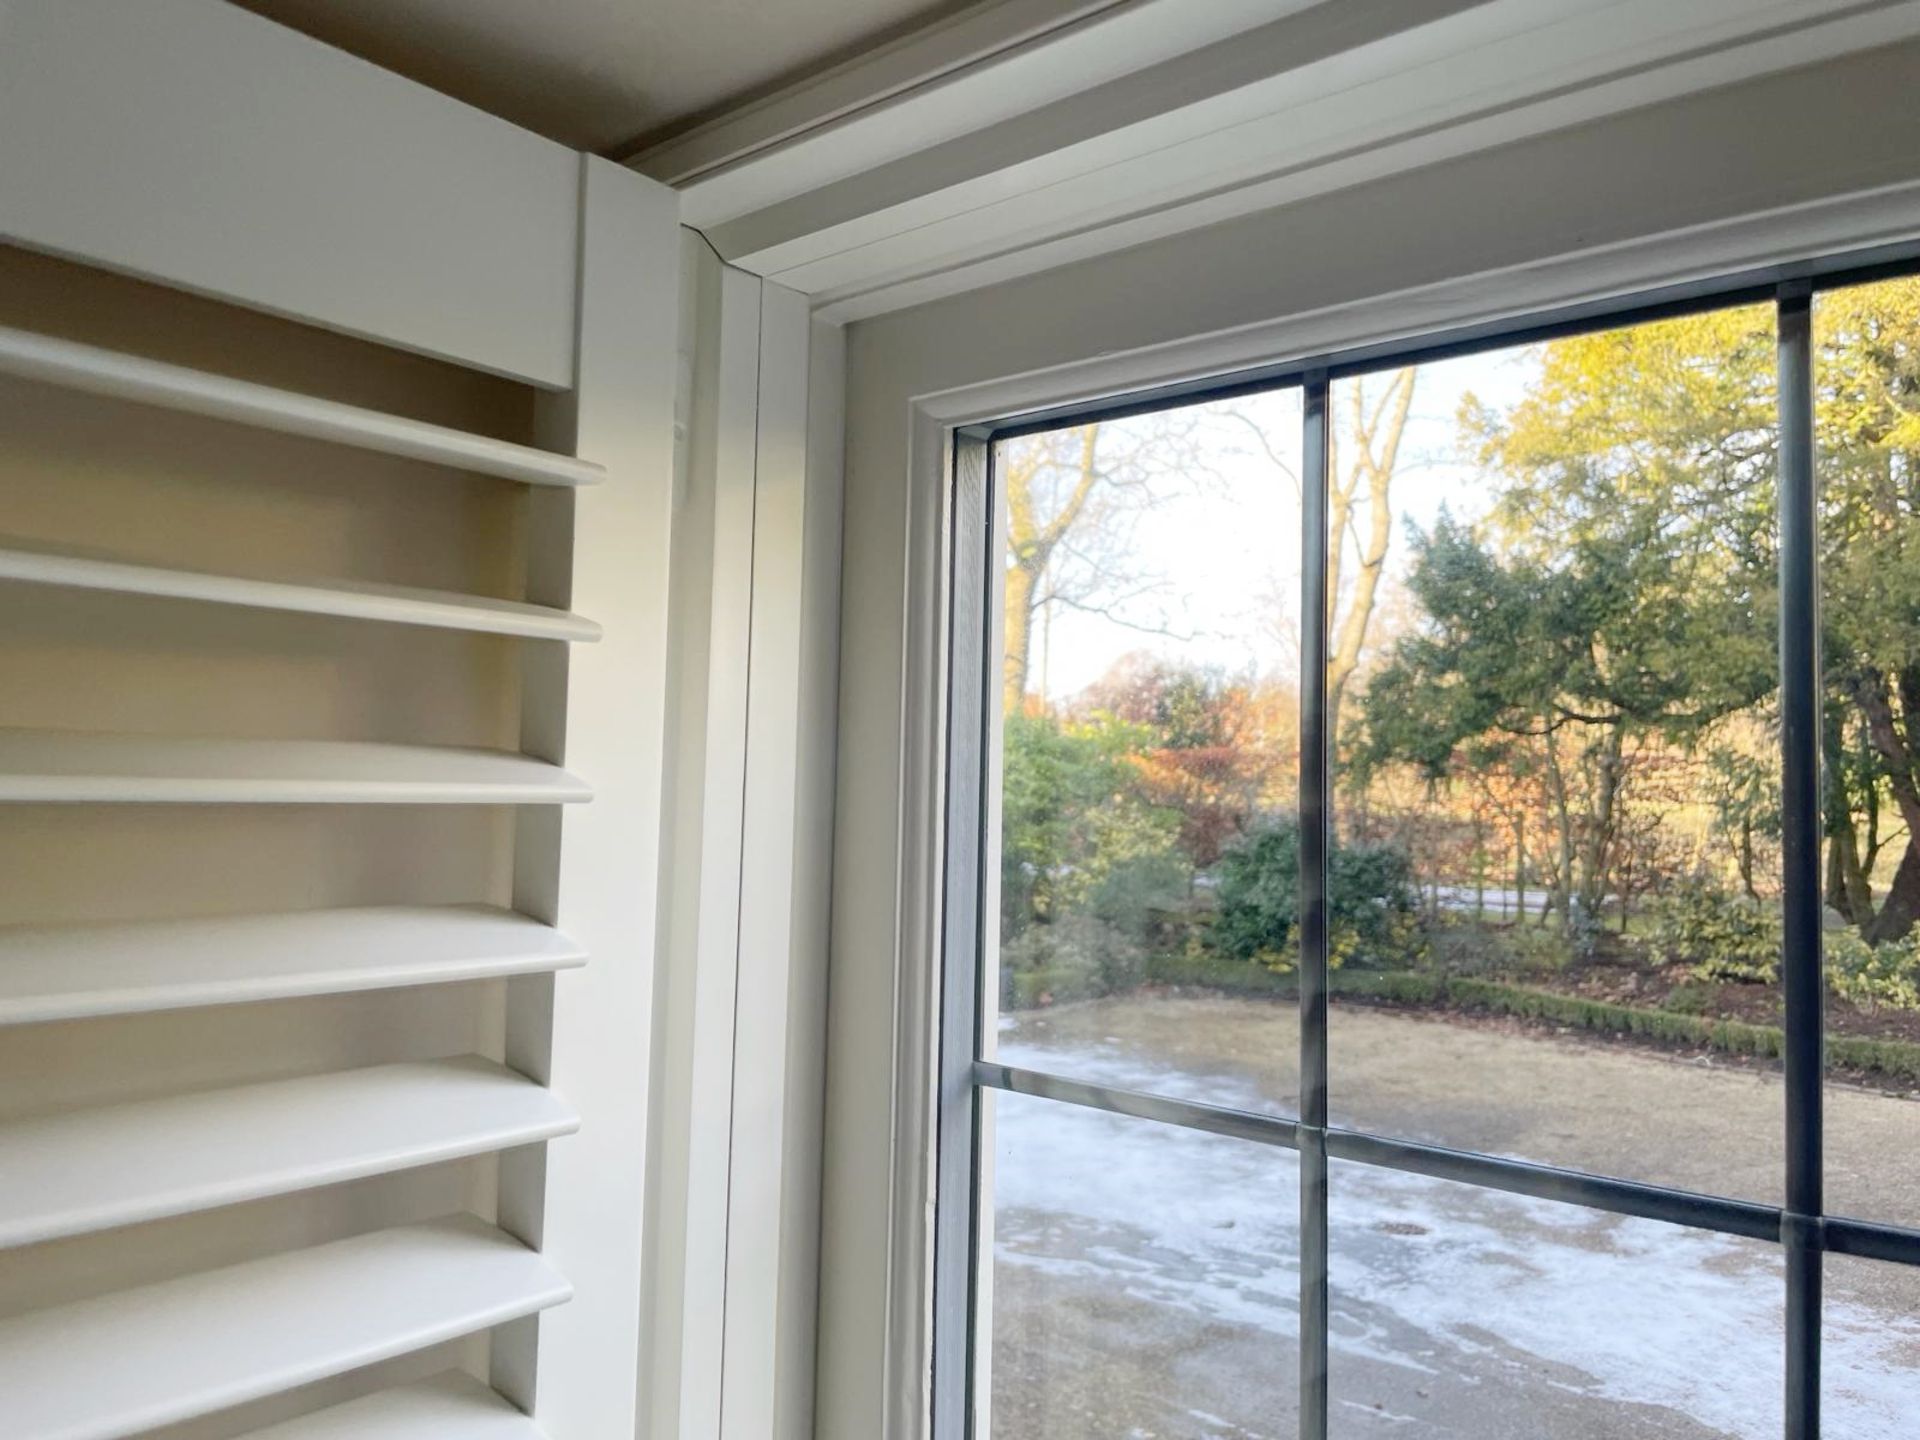 1 x Hardwood Timber Double Glazed Leaded 2-Pane Window Frame fitted with Shutter Blinds - Image 5 of 12